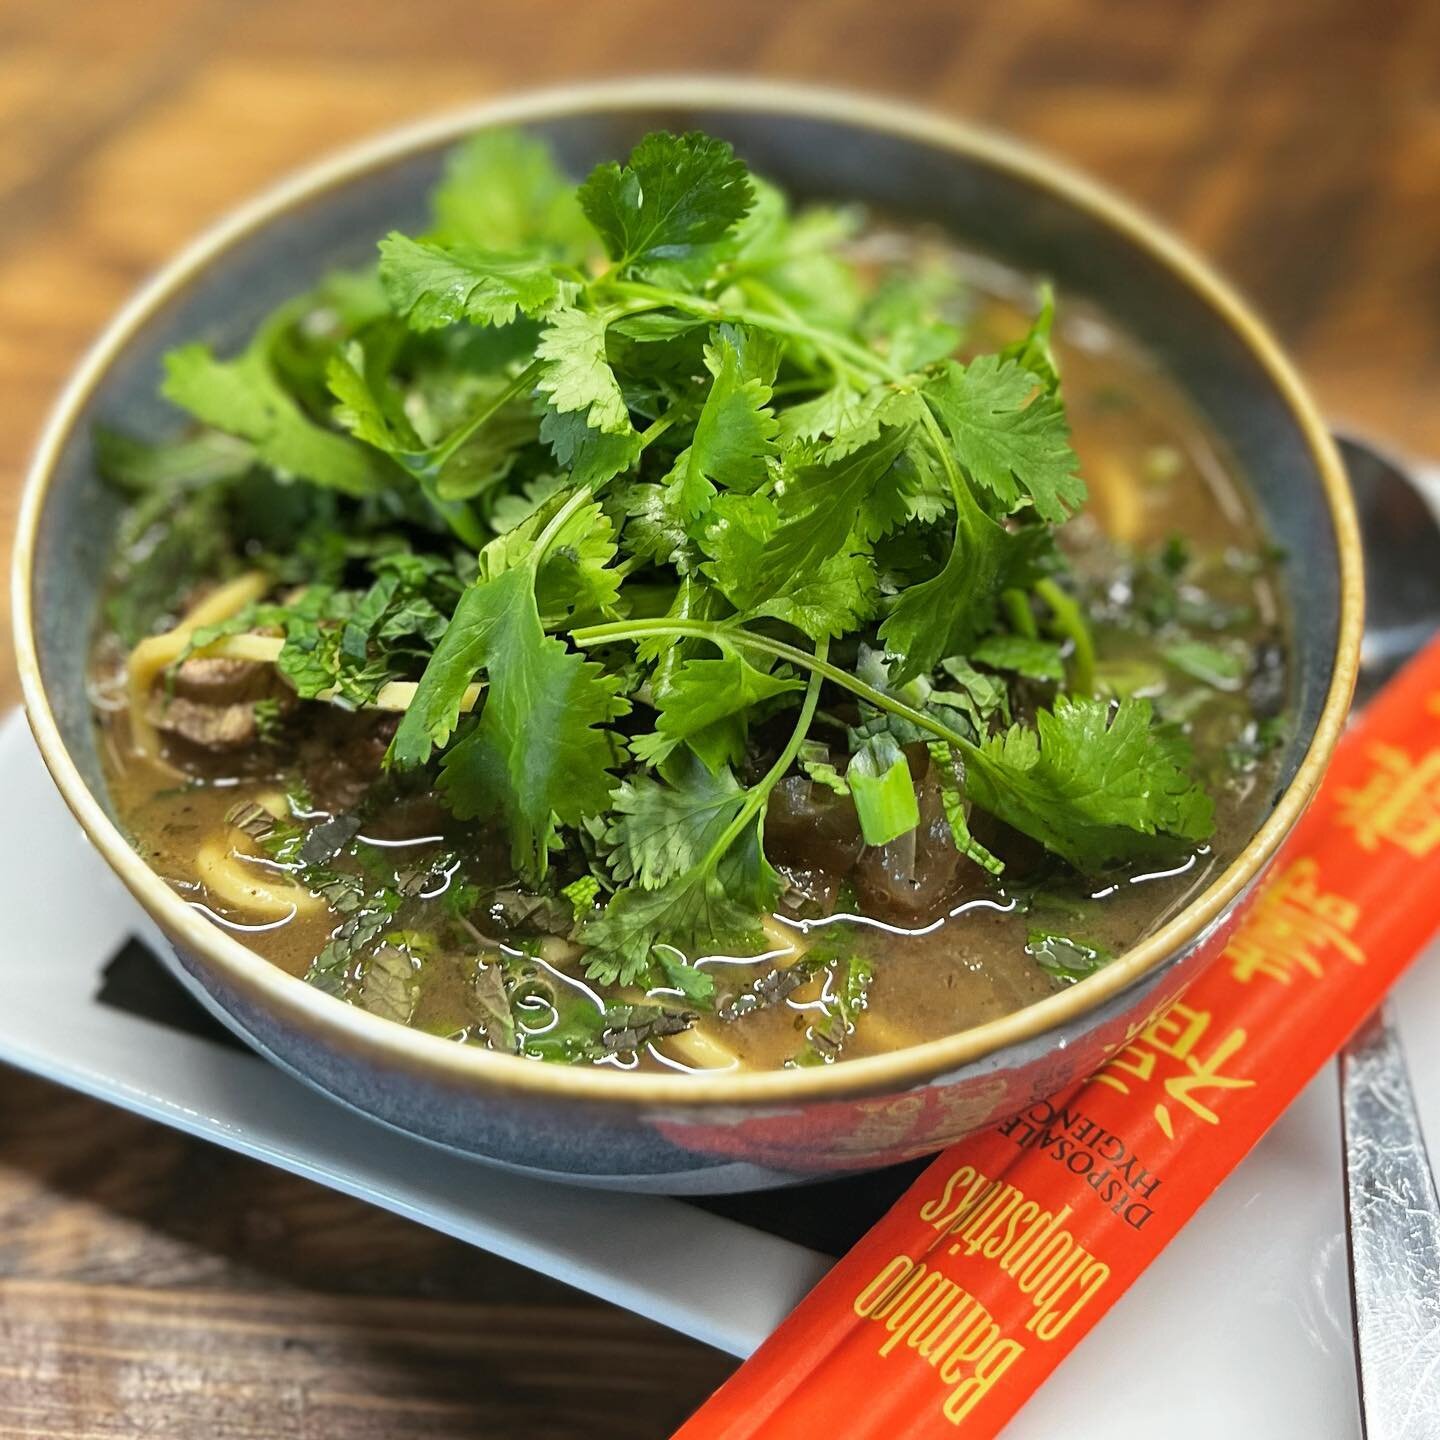 Beef Shawarma Noodle Soup 🍜 this will warm you up 👏 house-made caramelized onion + beef broth, fresh egg noodles, tender beef shawarma, lots of fresh cilantro, mint &amp; scallions 🌿 #noodles #davesfreshpasta #noodlesoup #pho #kinda #beefshawarma 